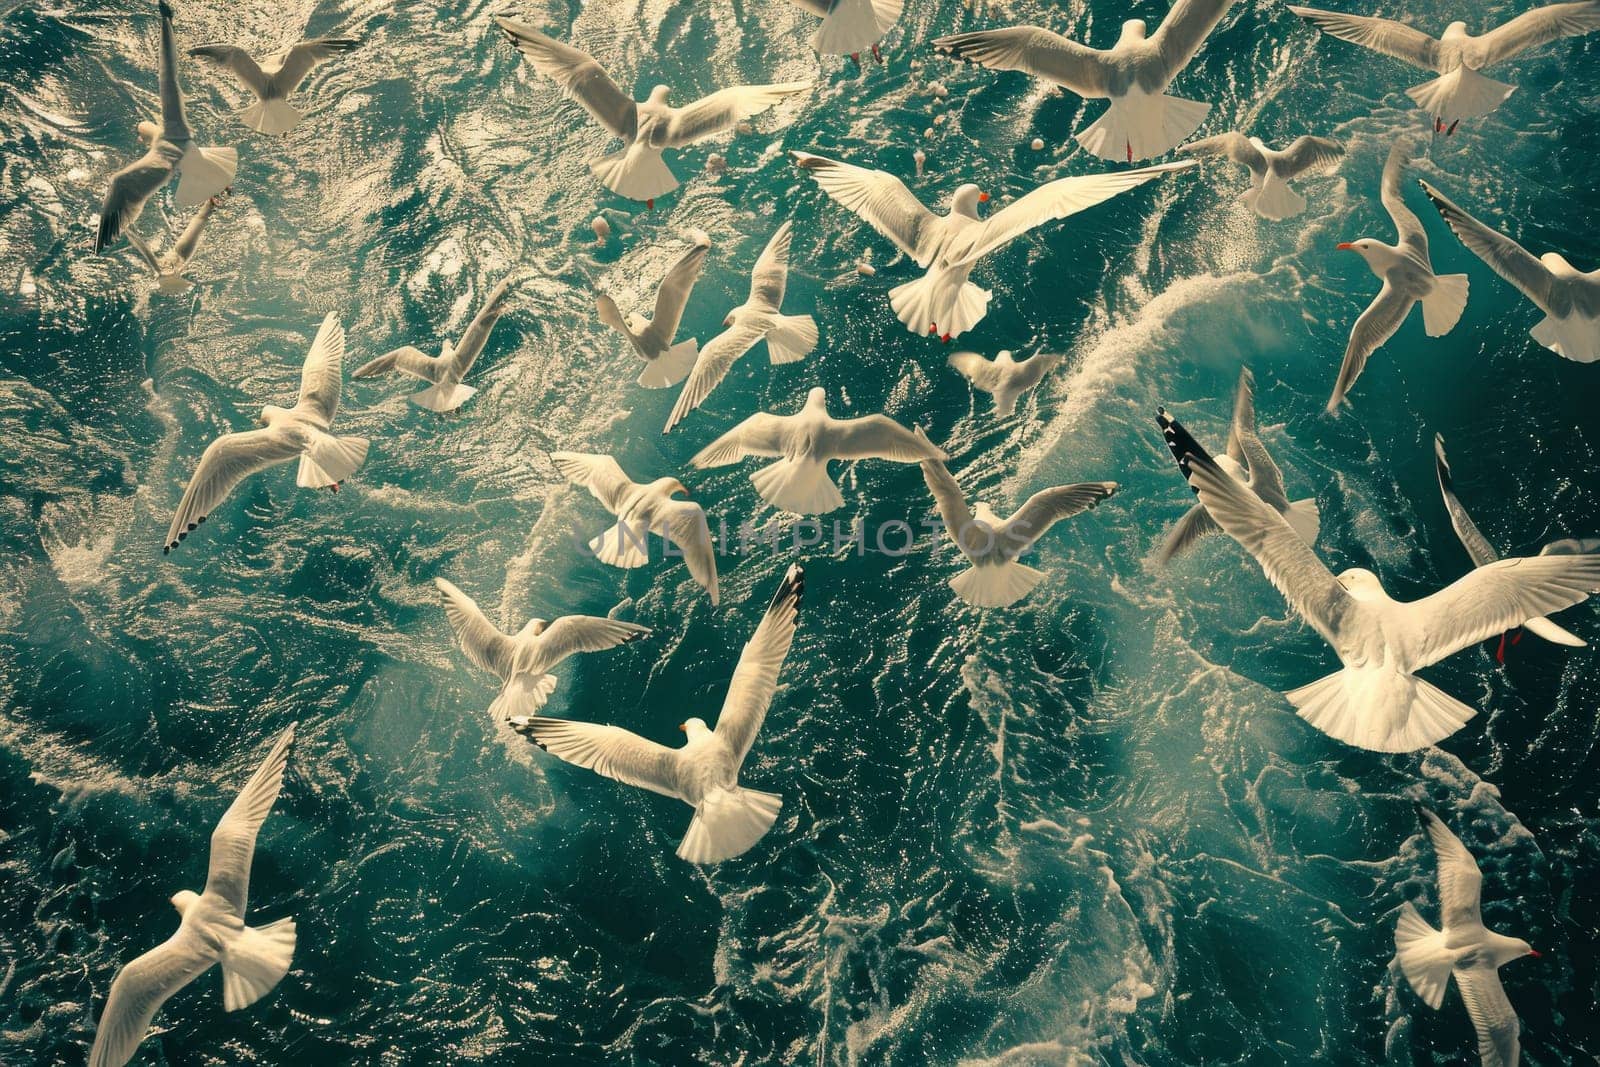 A flock of seagulls flying over the ocean. The birds are white and the water is blue